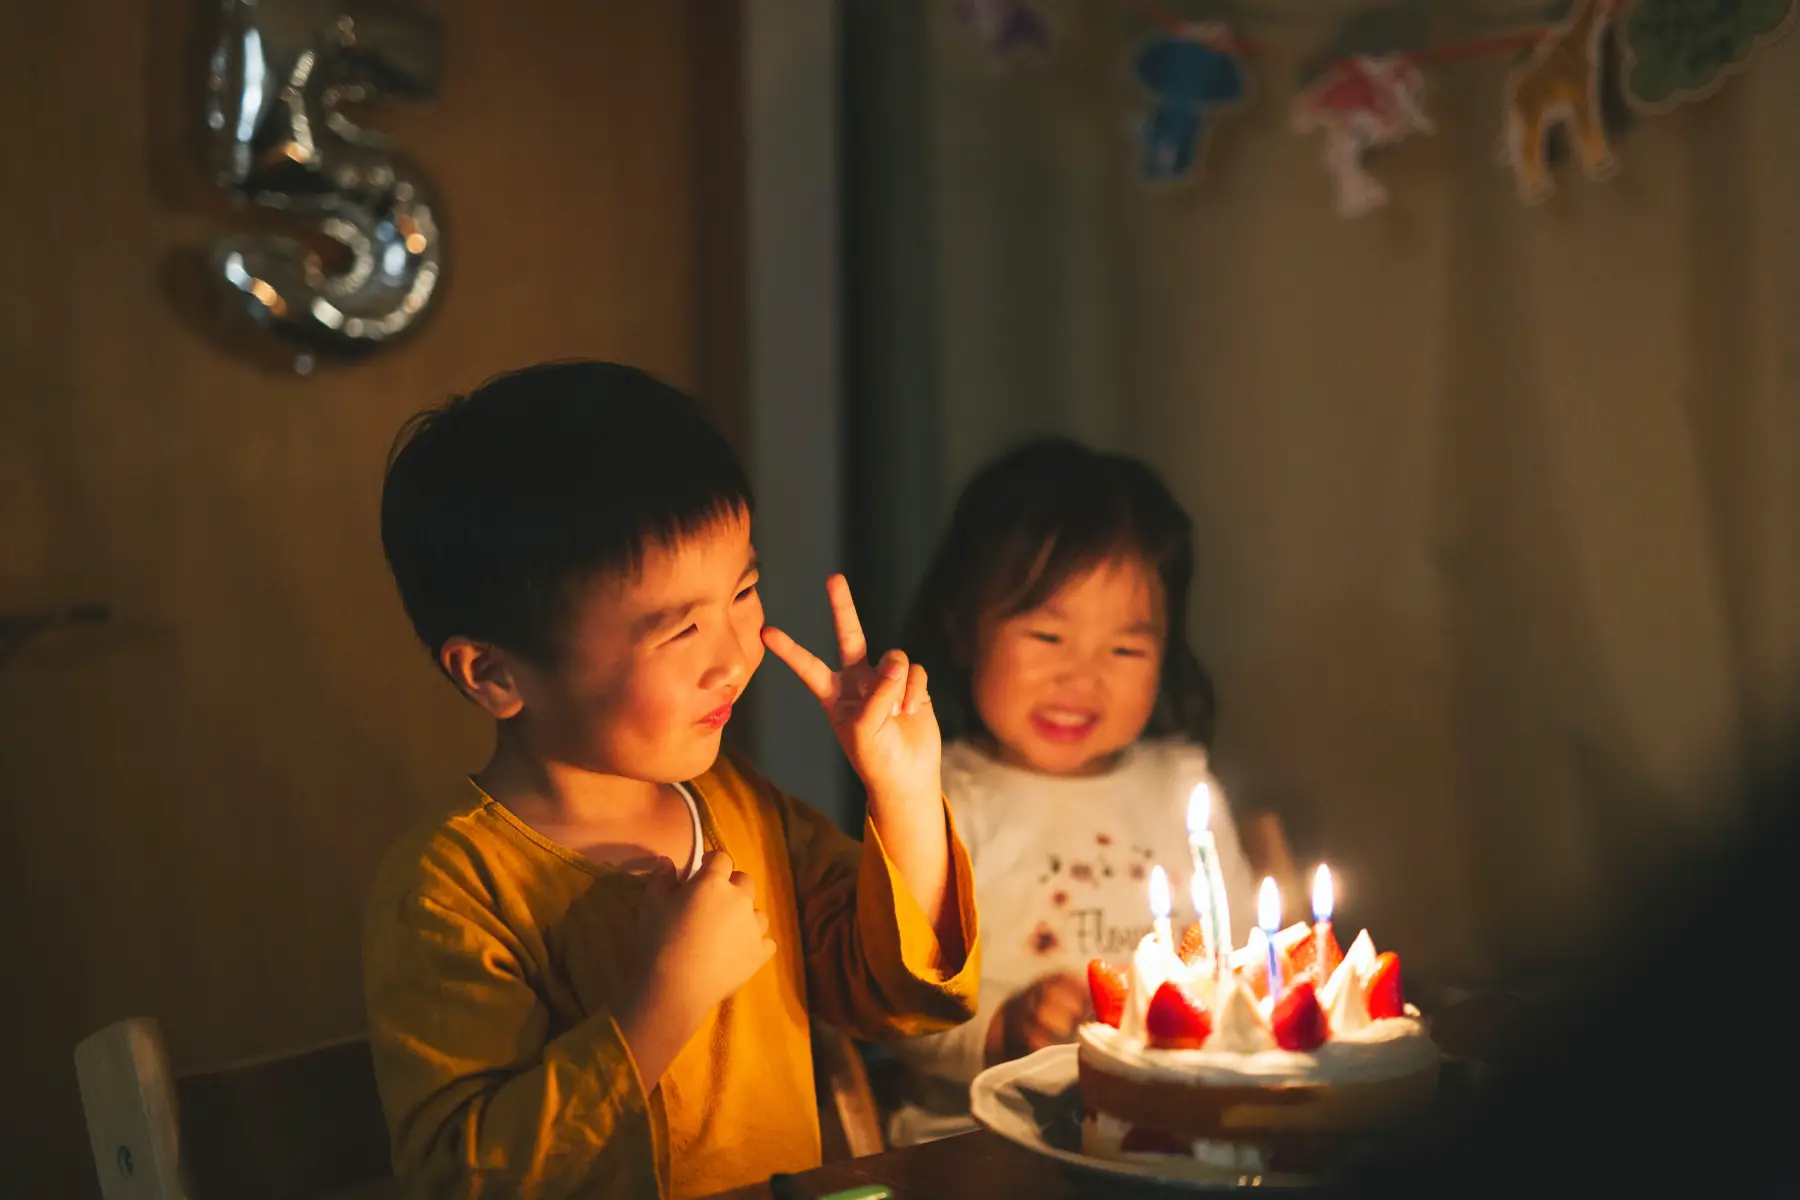 Child holds up peace next to his sister as they sit in front of a lit birthday cake